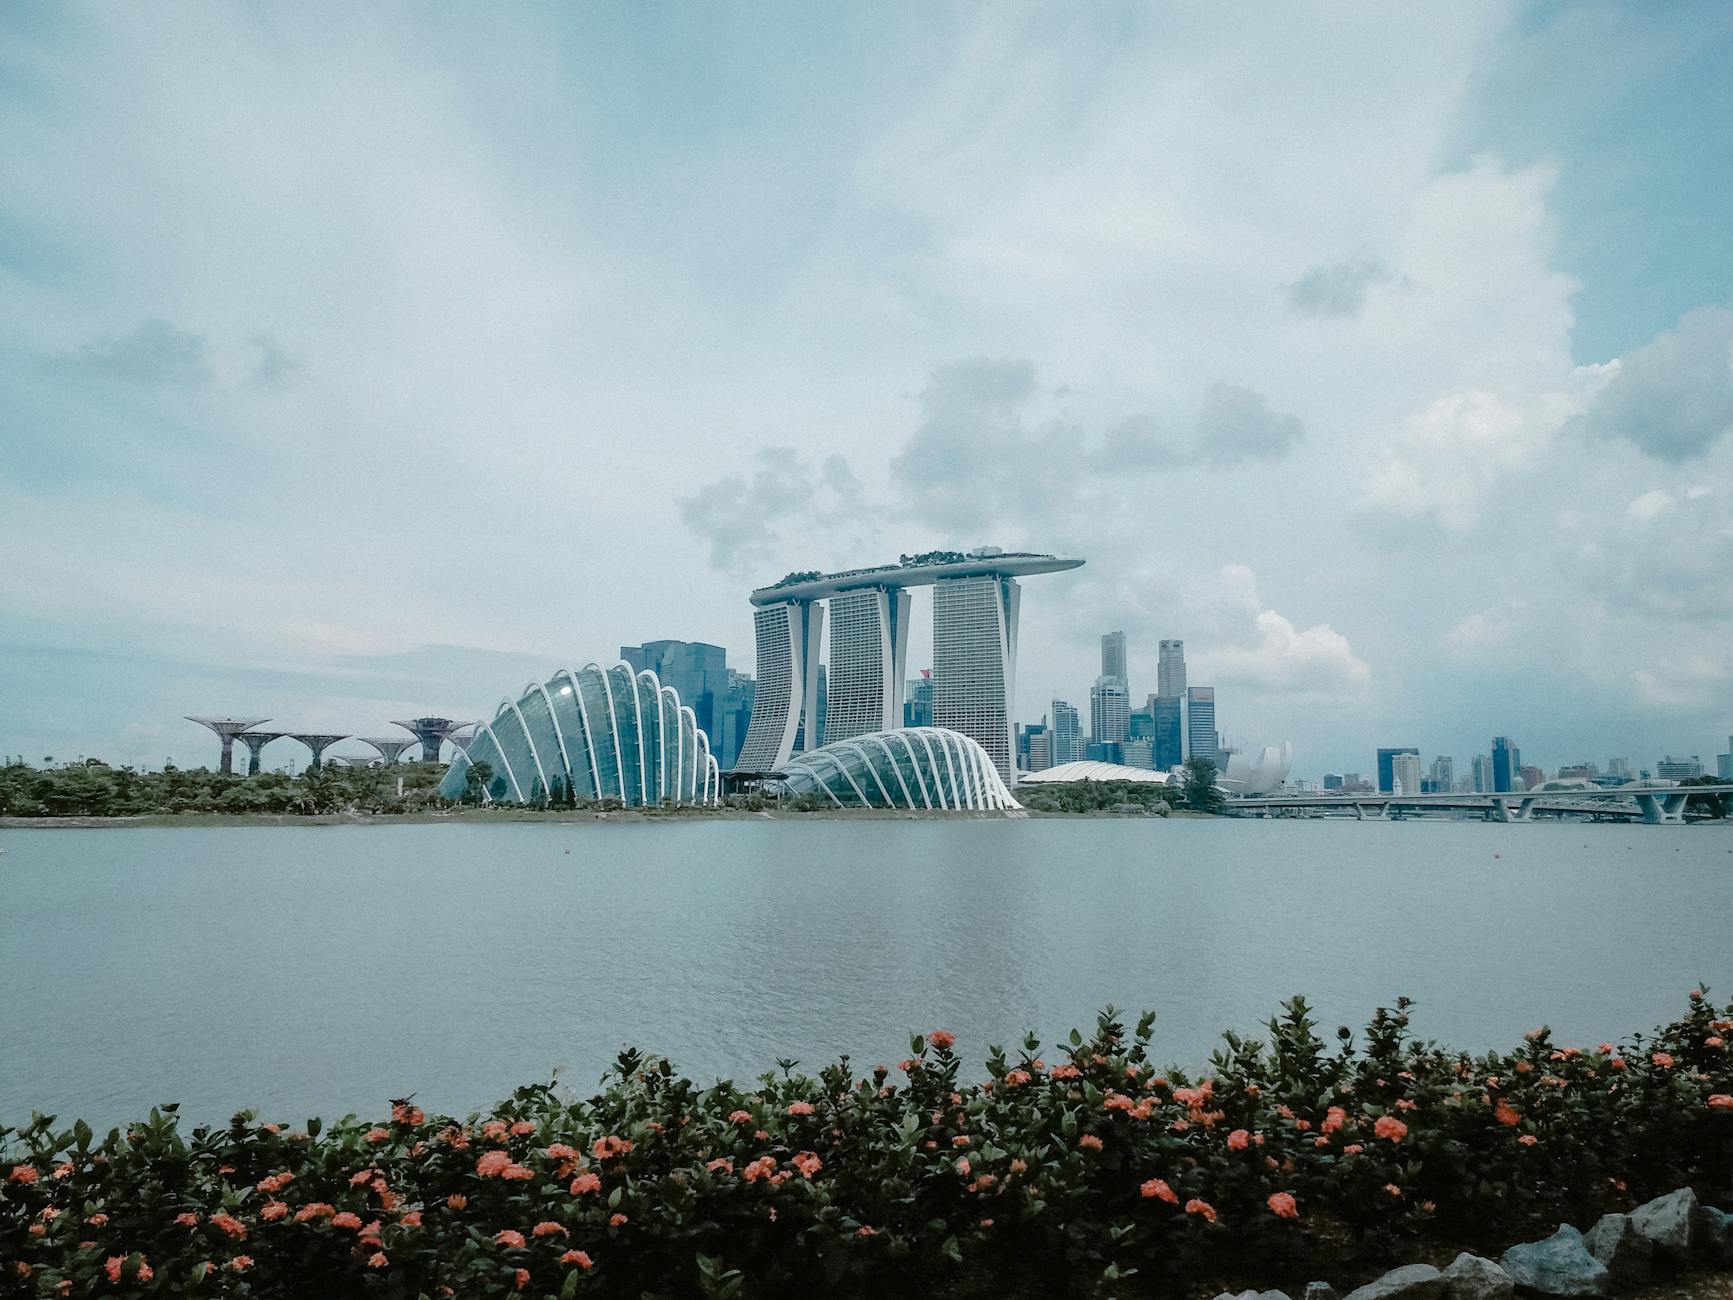 view of the marina bay sands in singapore, Marina Bay Sands quotes